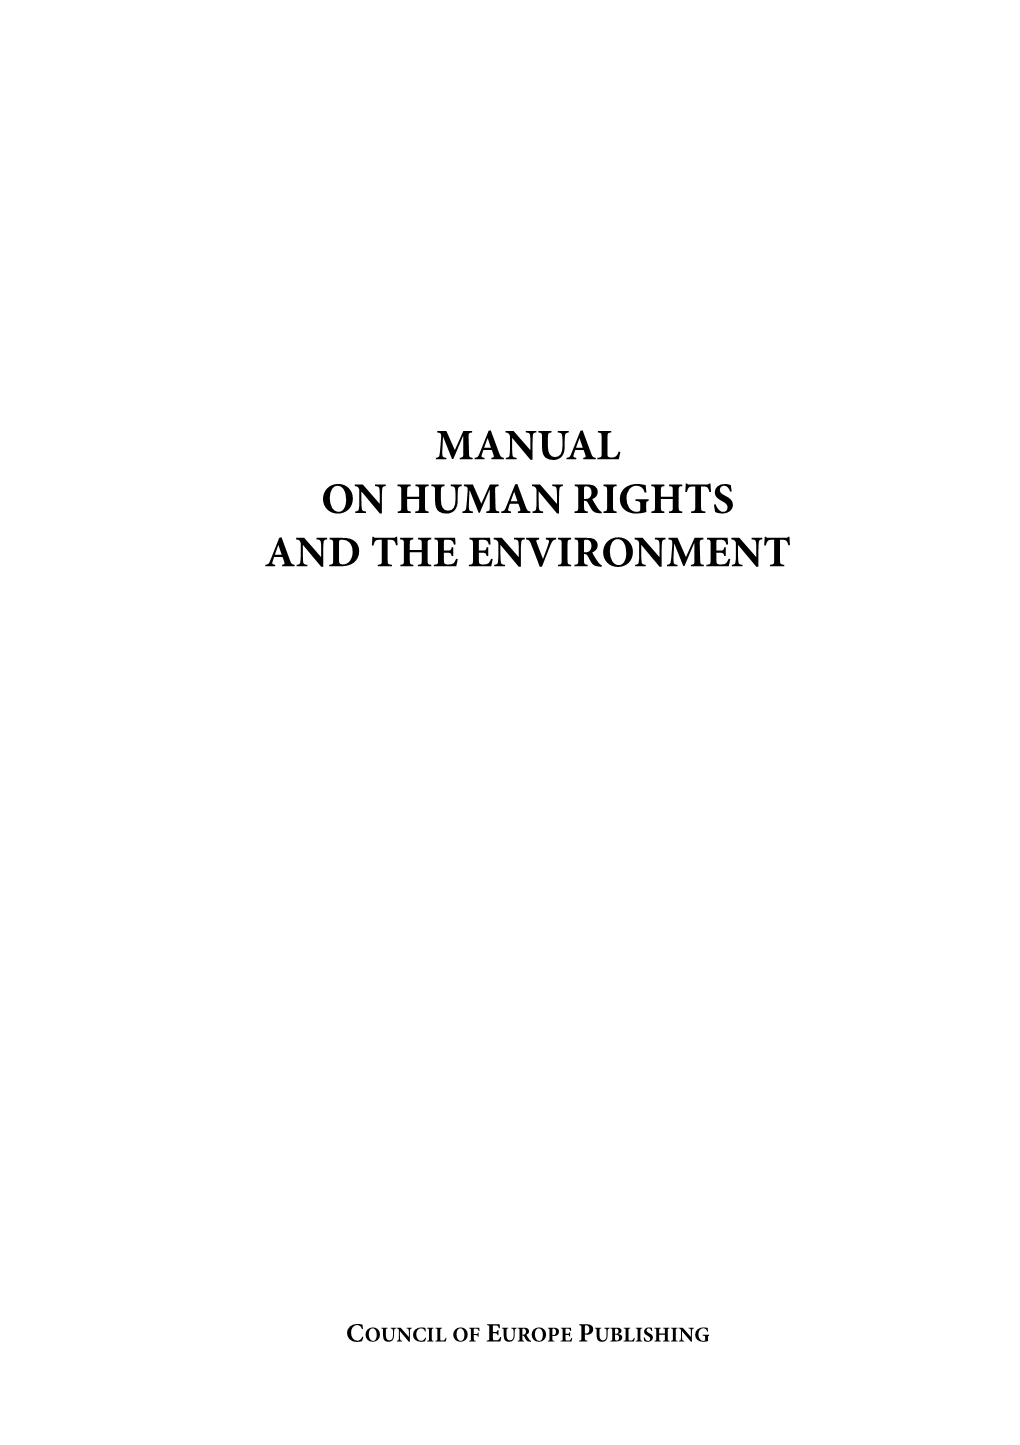 Manual on Human Rights in the Environment